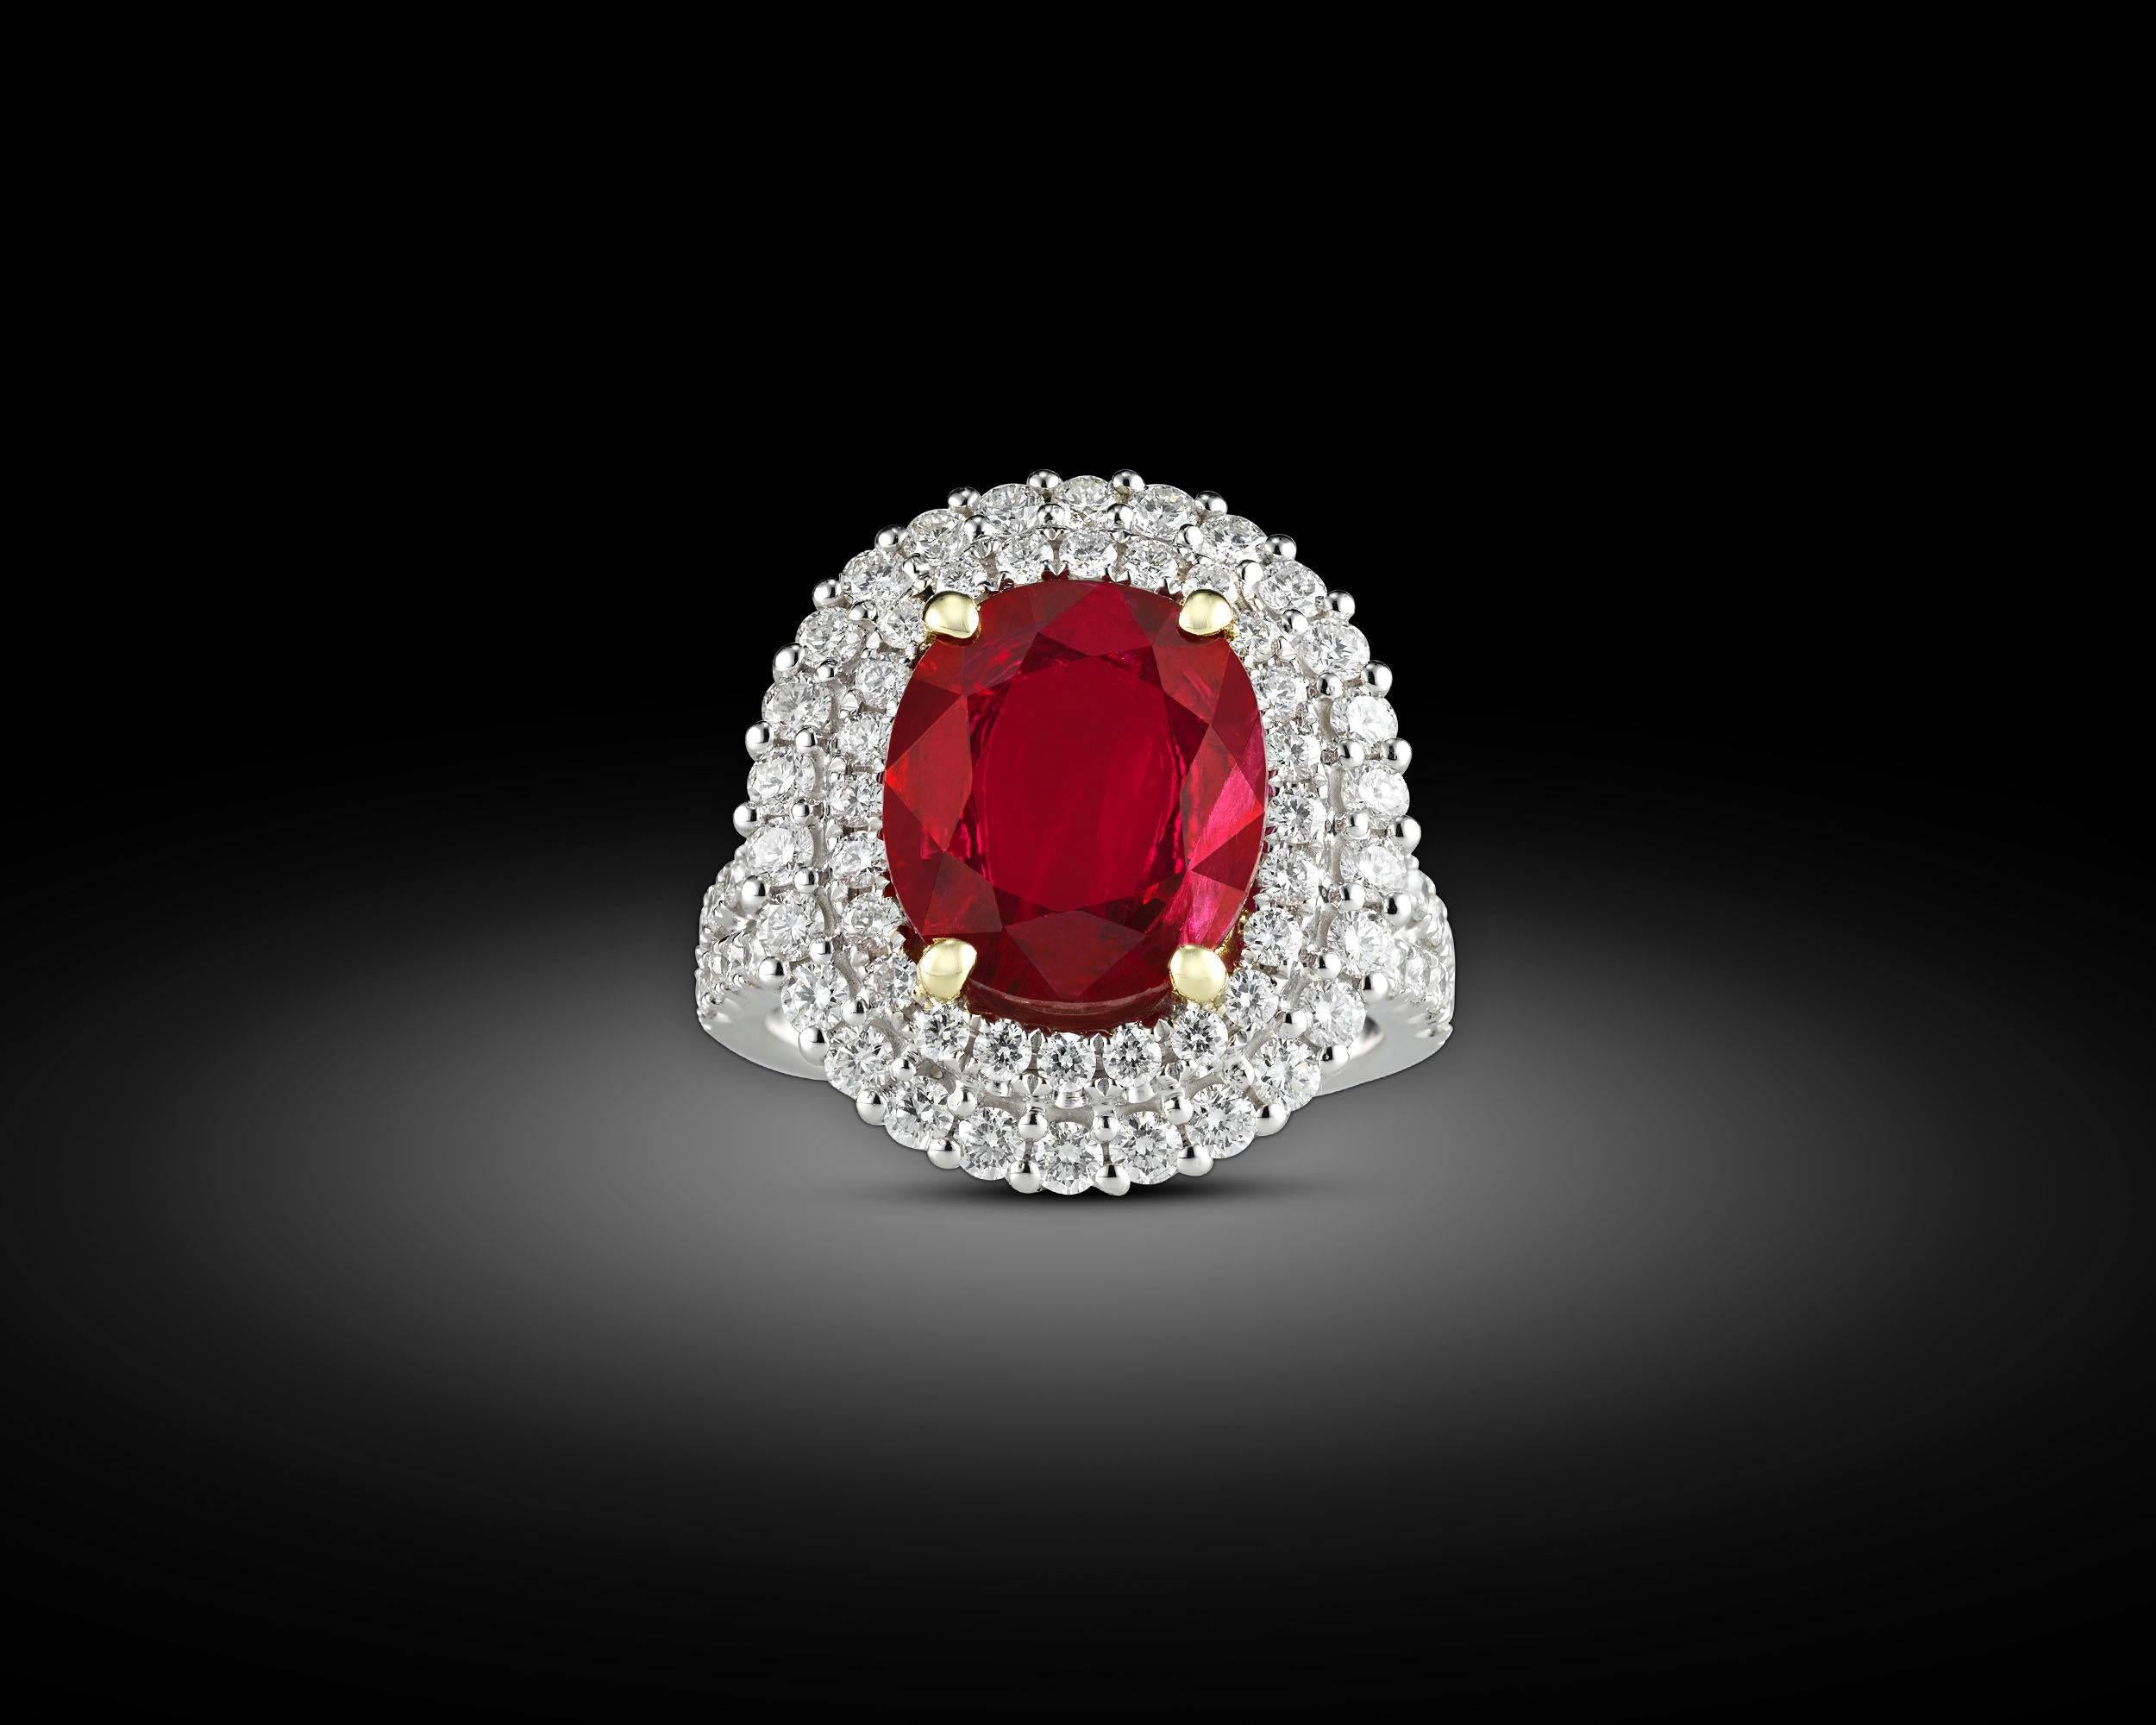 A brilliant 3.95-carat oval Burma ruby radiates at the center of this elegant ring. The surrounding white diamonds, weighing 1.53 total carats, add to the dramatic glow of the striking gemstone. The diamonds form a bold double halo around the gem,